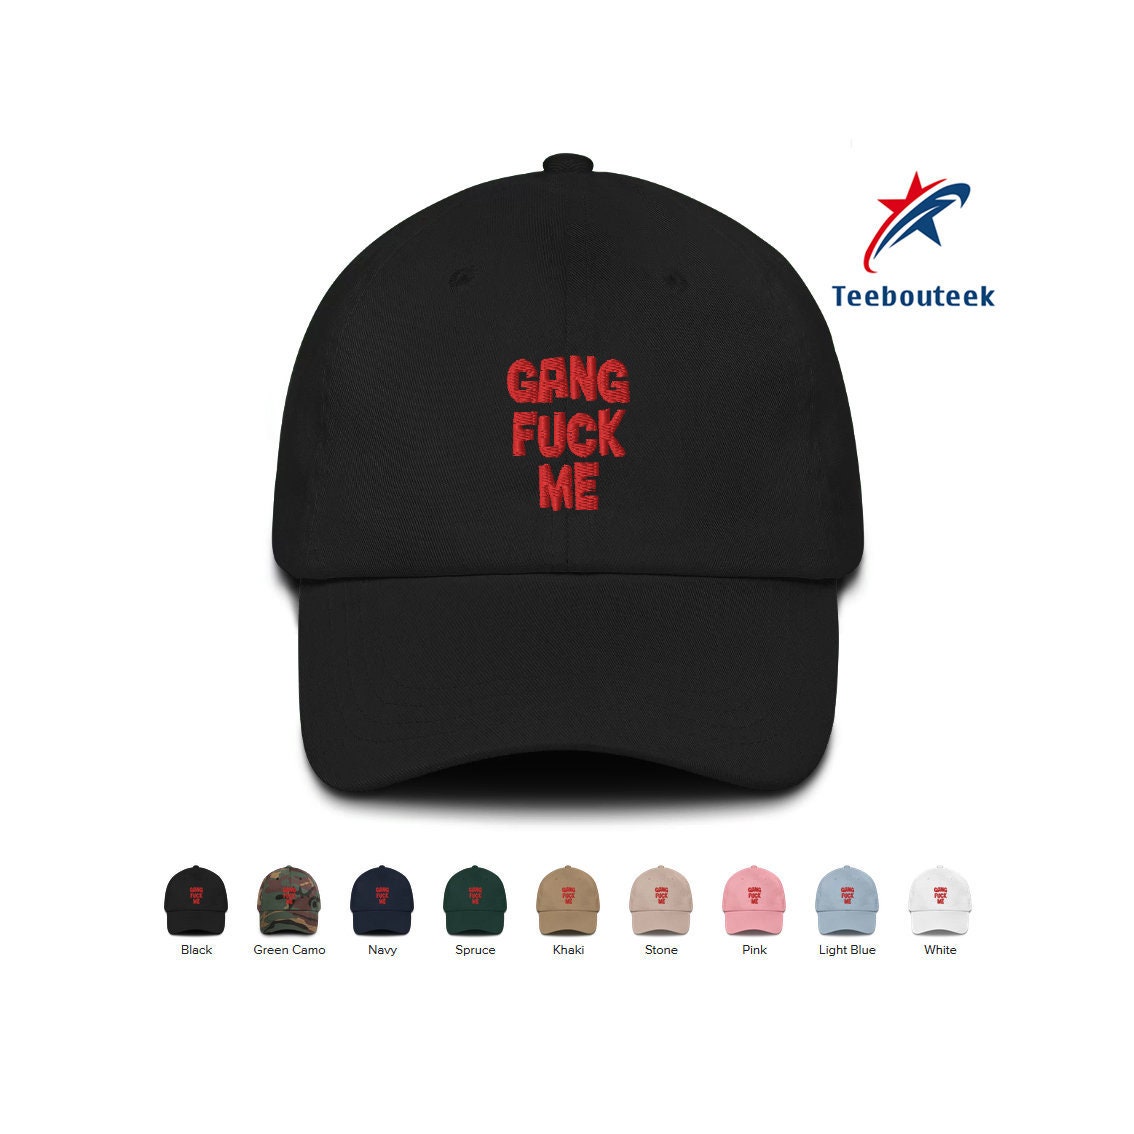 Gang Fuck Me Hat Embroidered Baseball Cap Slut Whore picture